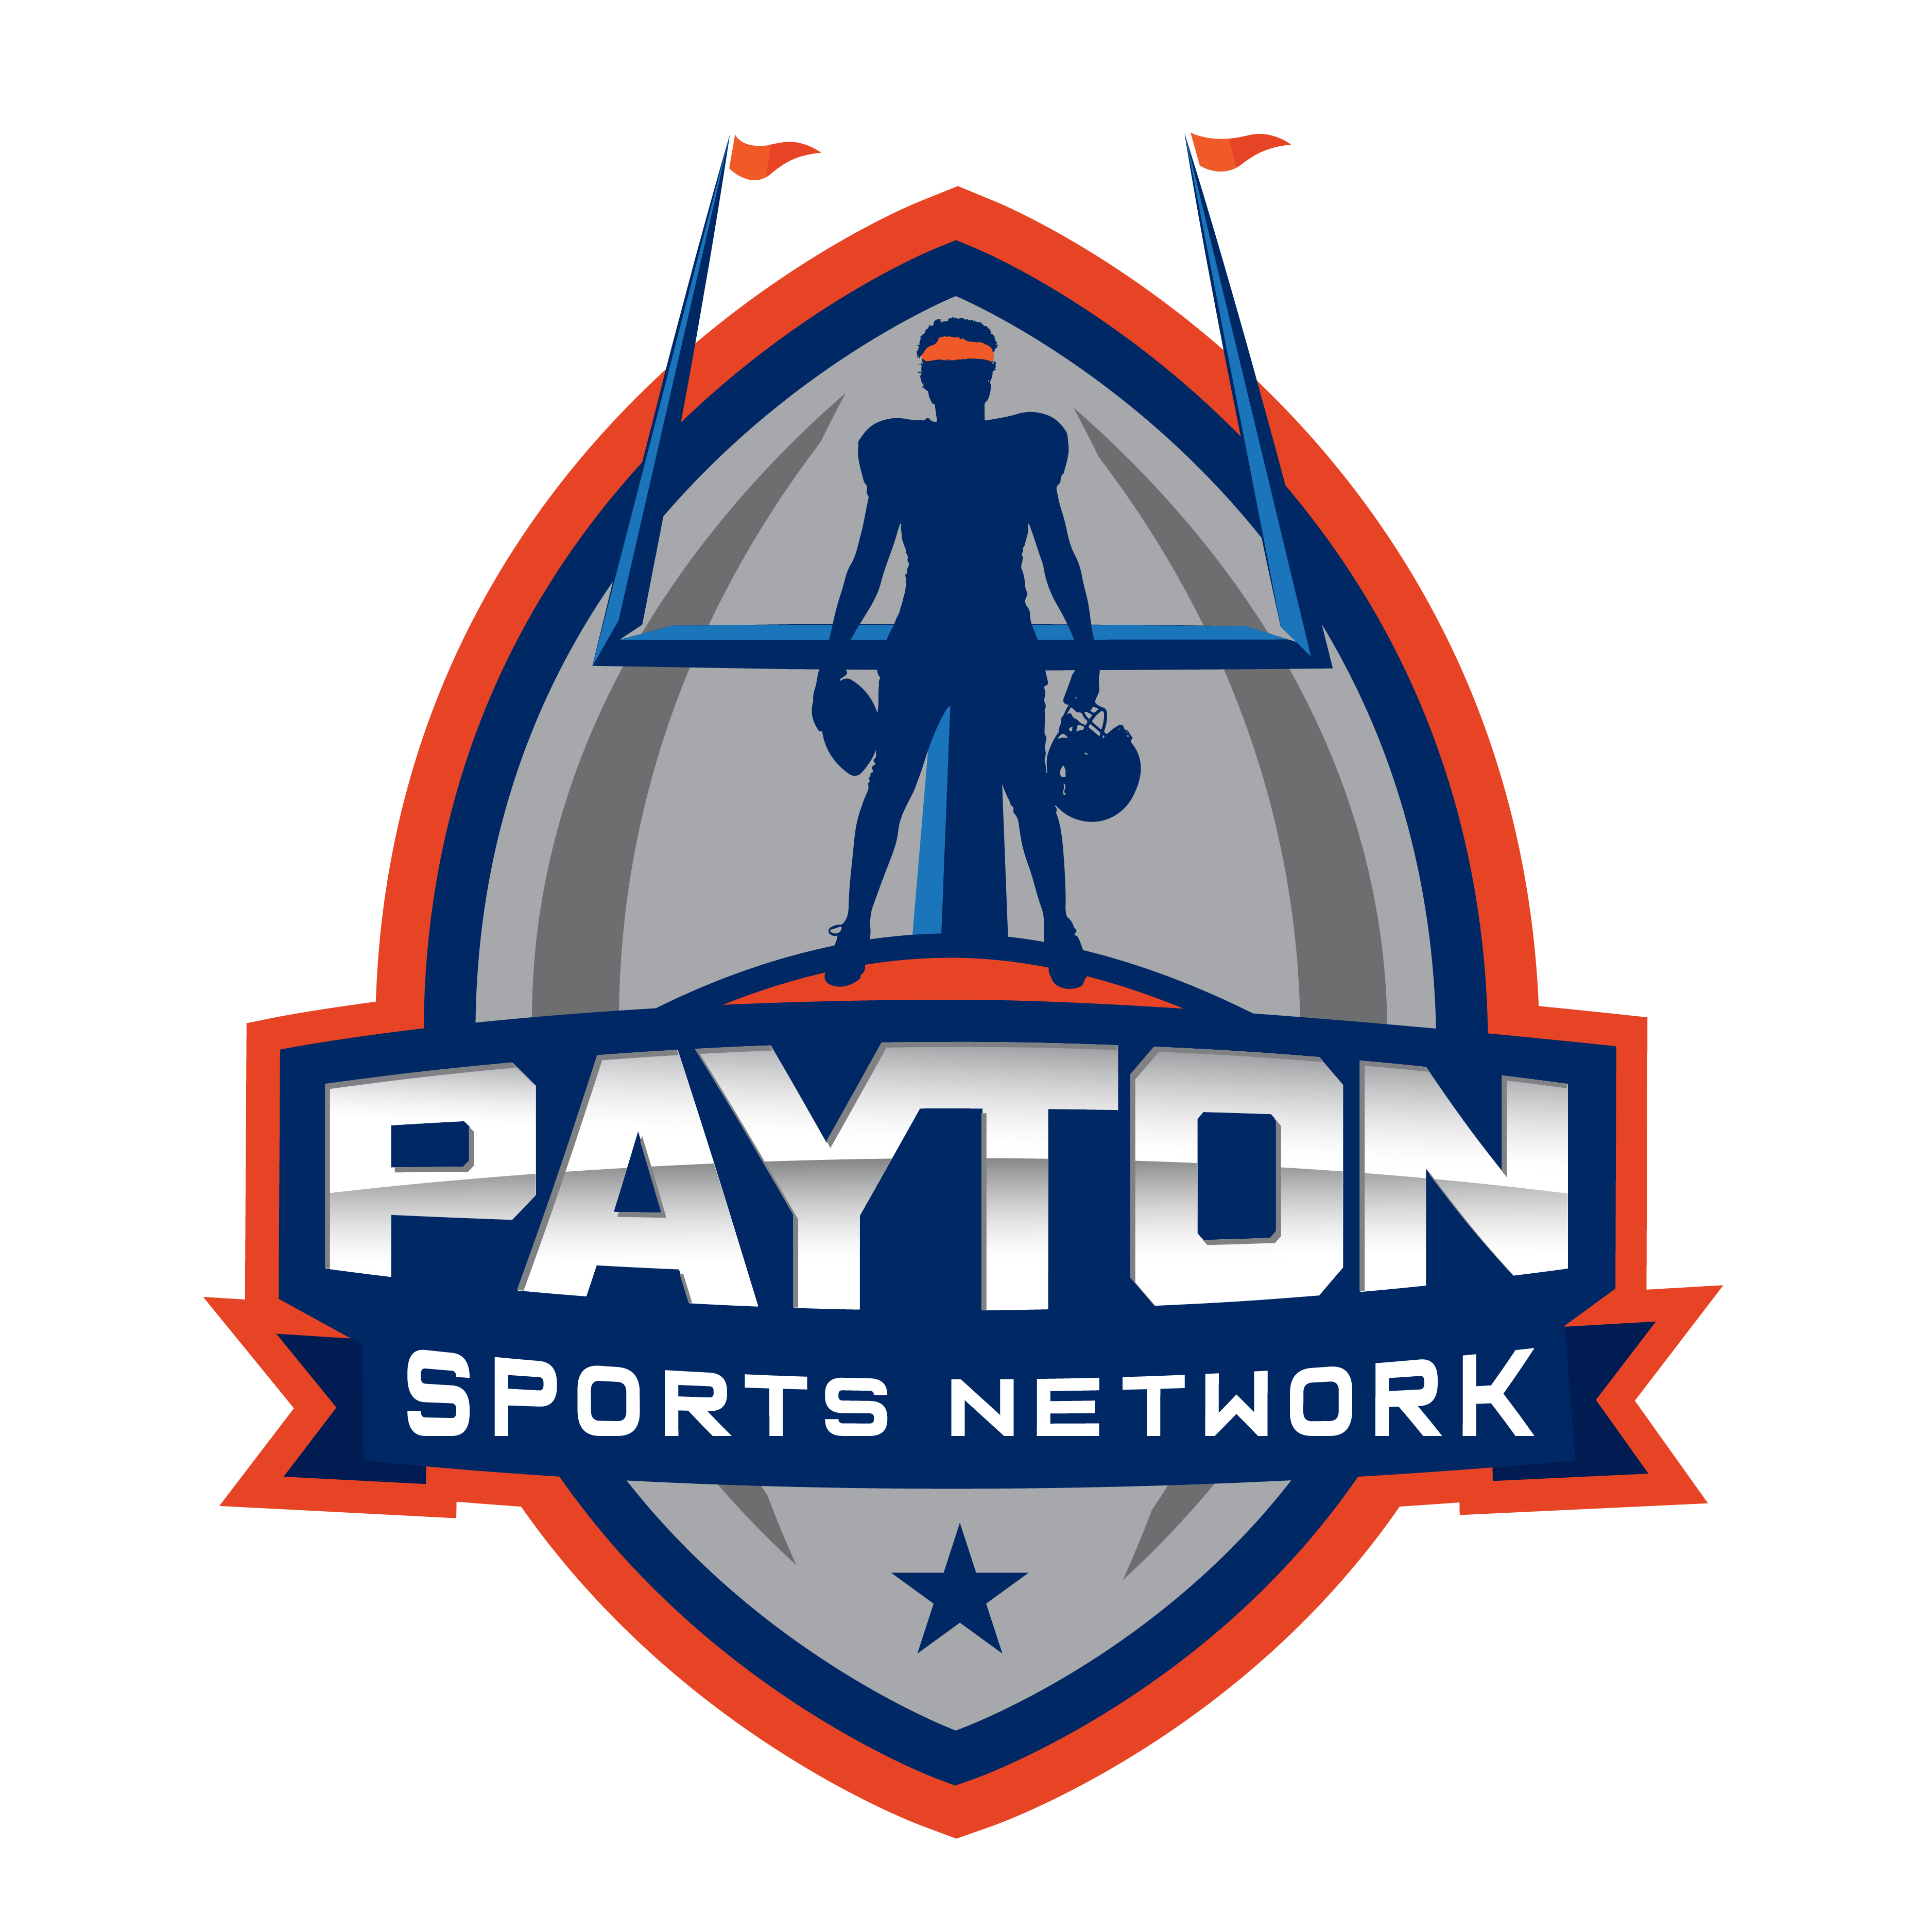 Payton Sports Network Football Badge  logo design by logo designer Detour Graphic Design Inc.  for your inspiration and for the worlds largest logo competition